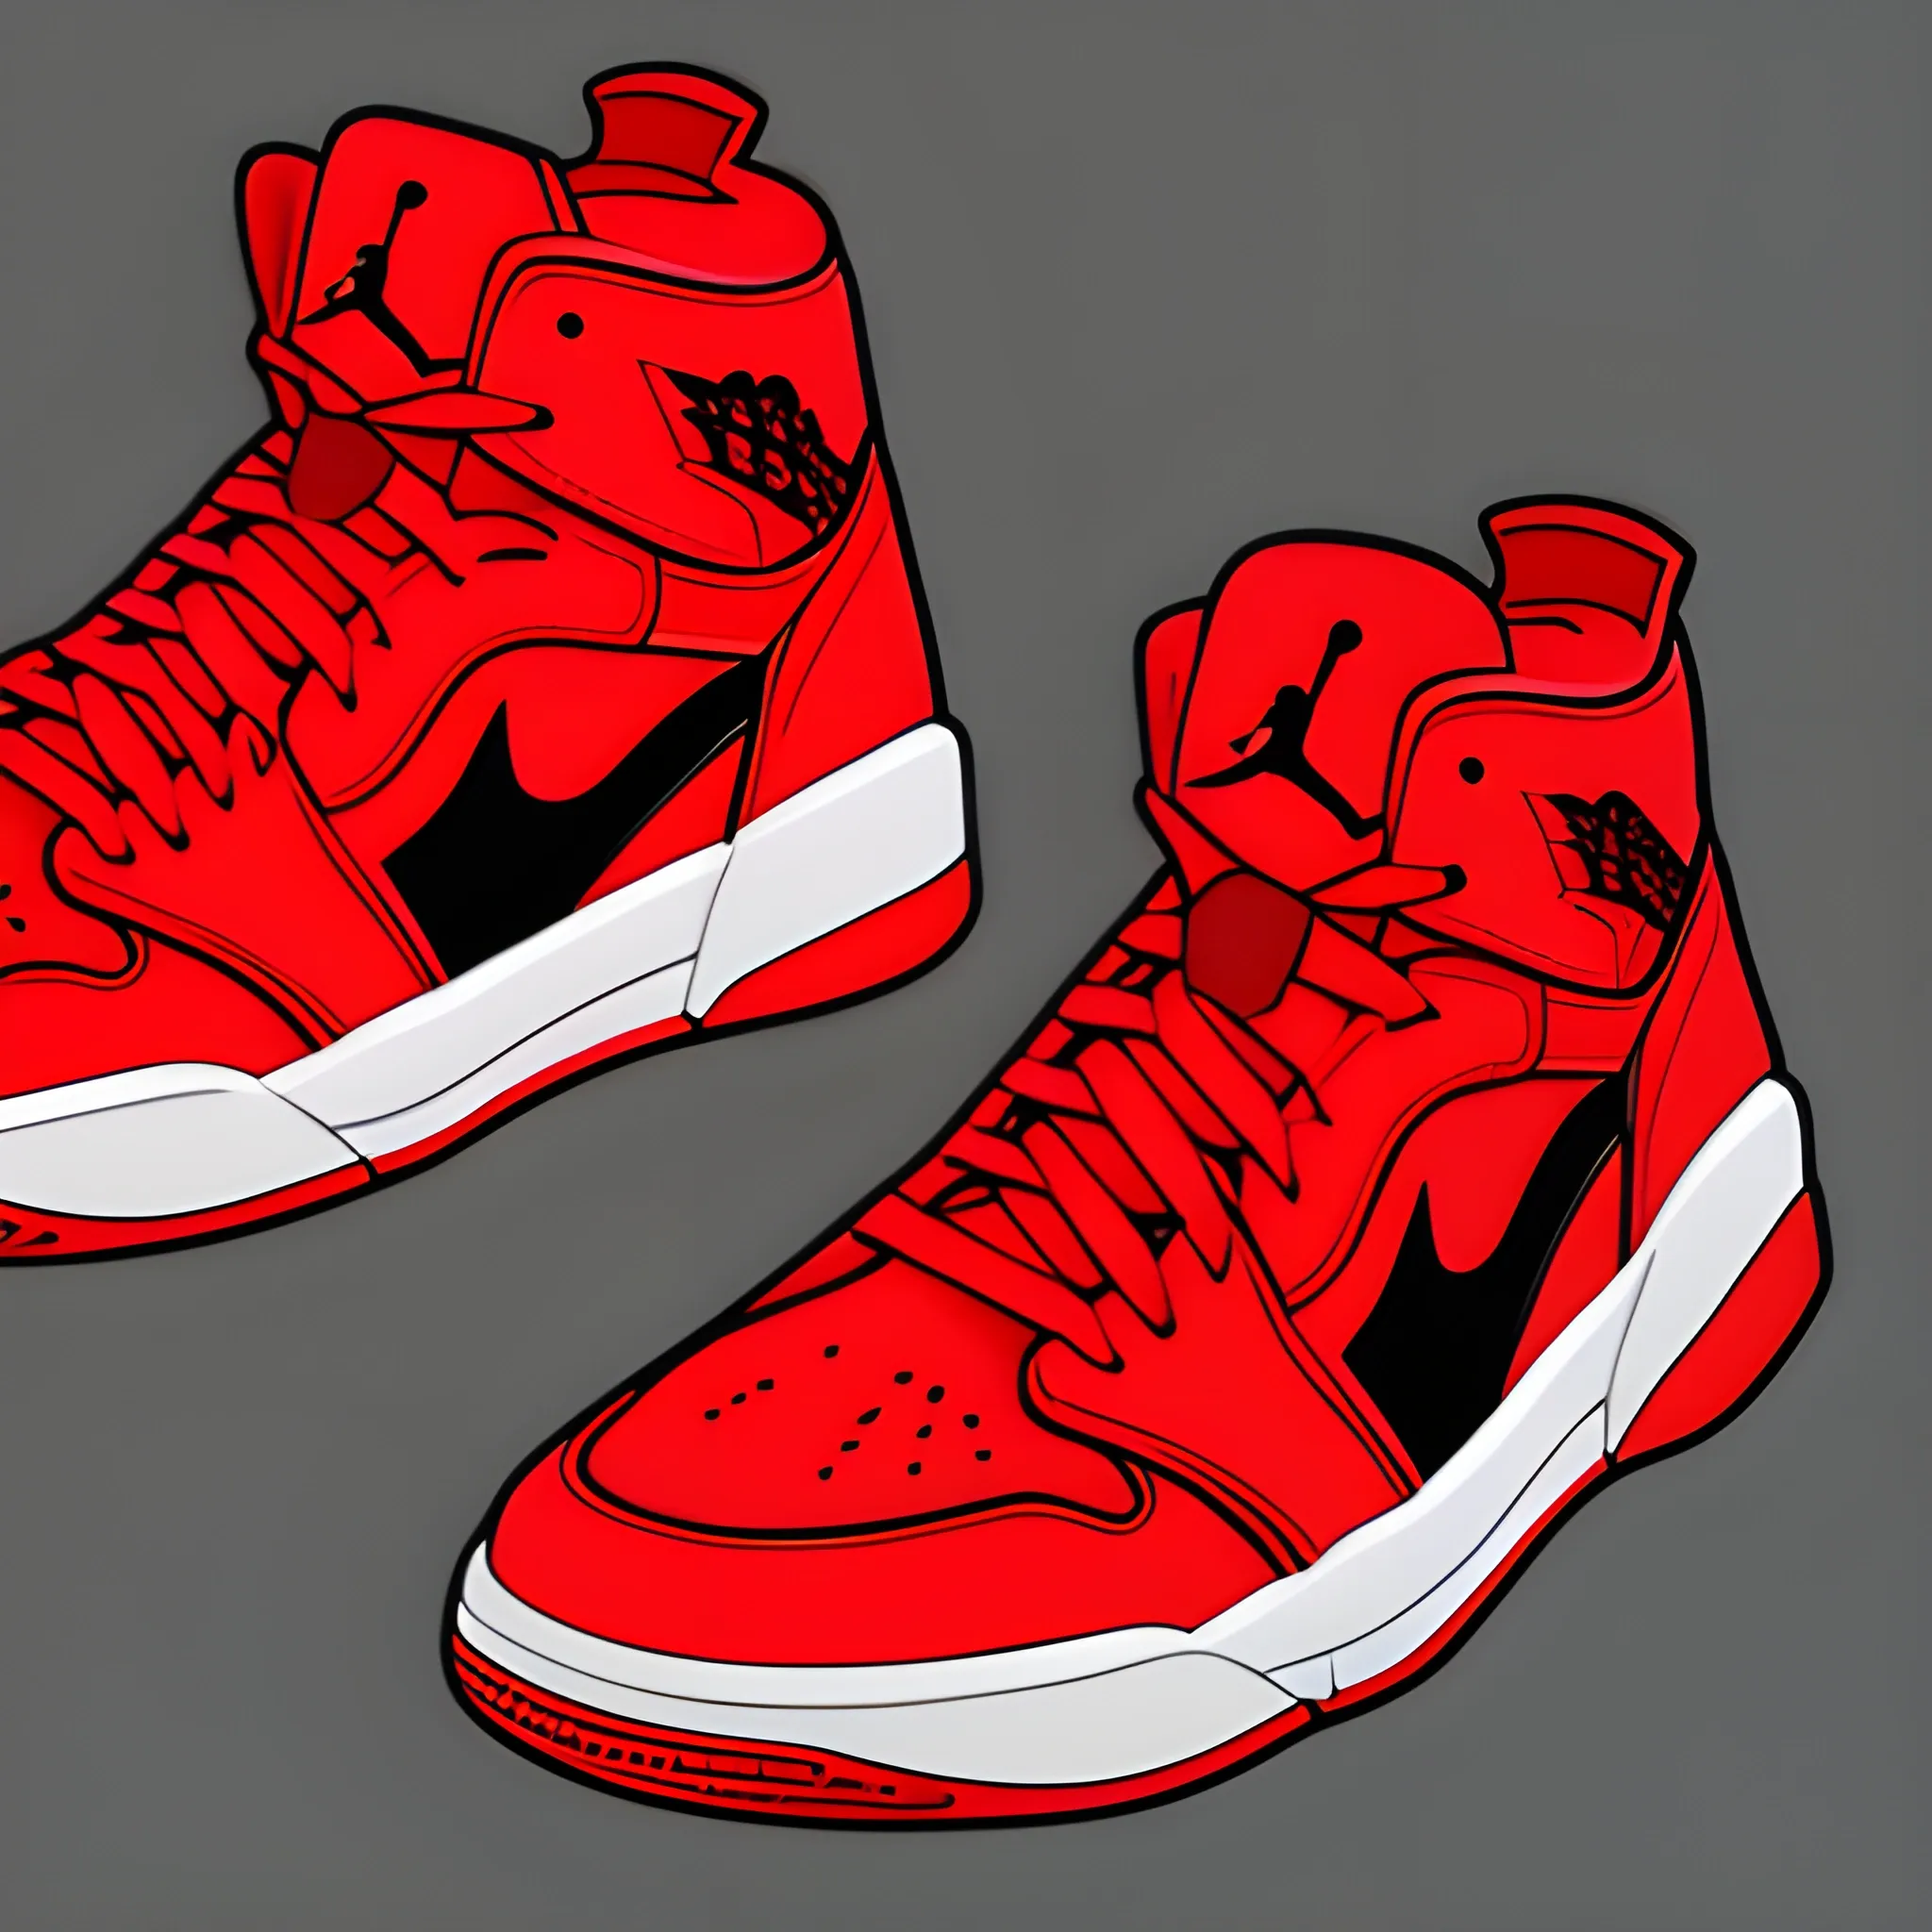 Generates an image of Jordan-type shoes with color red., Cartoon ...